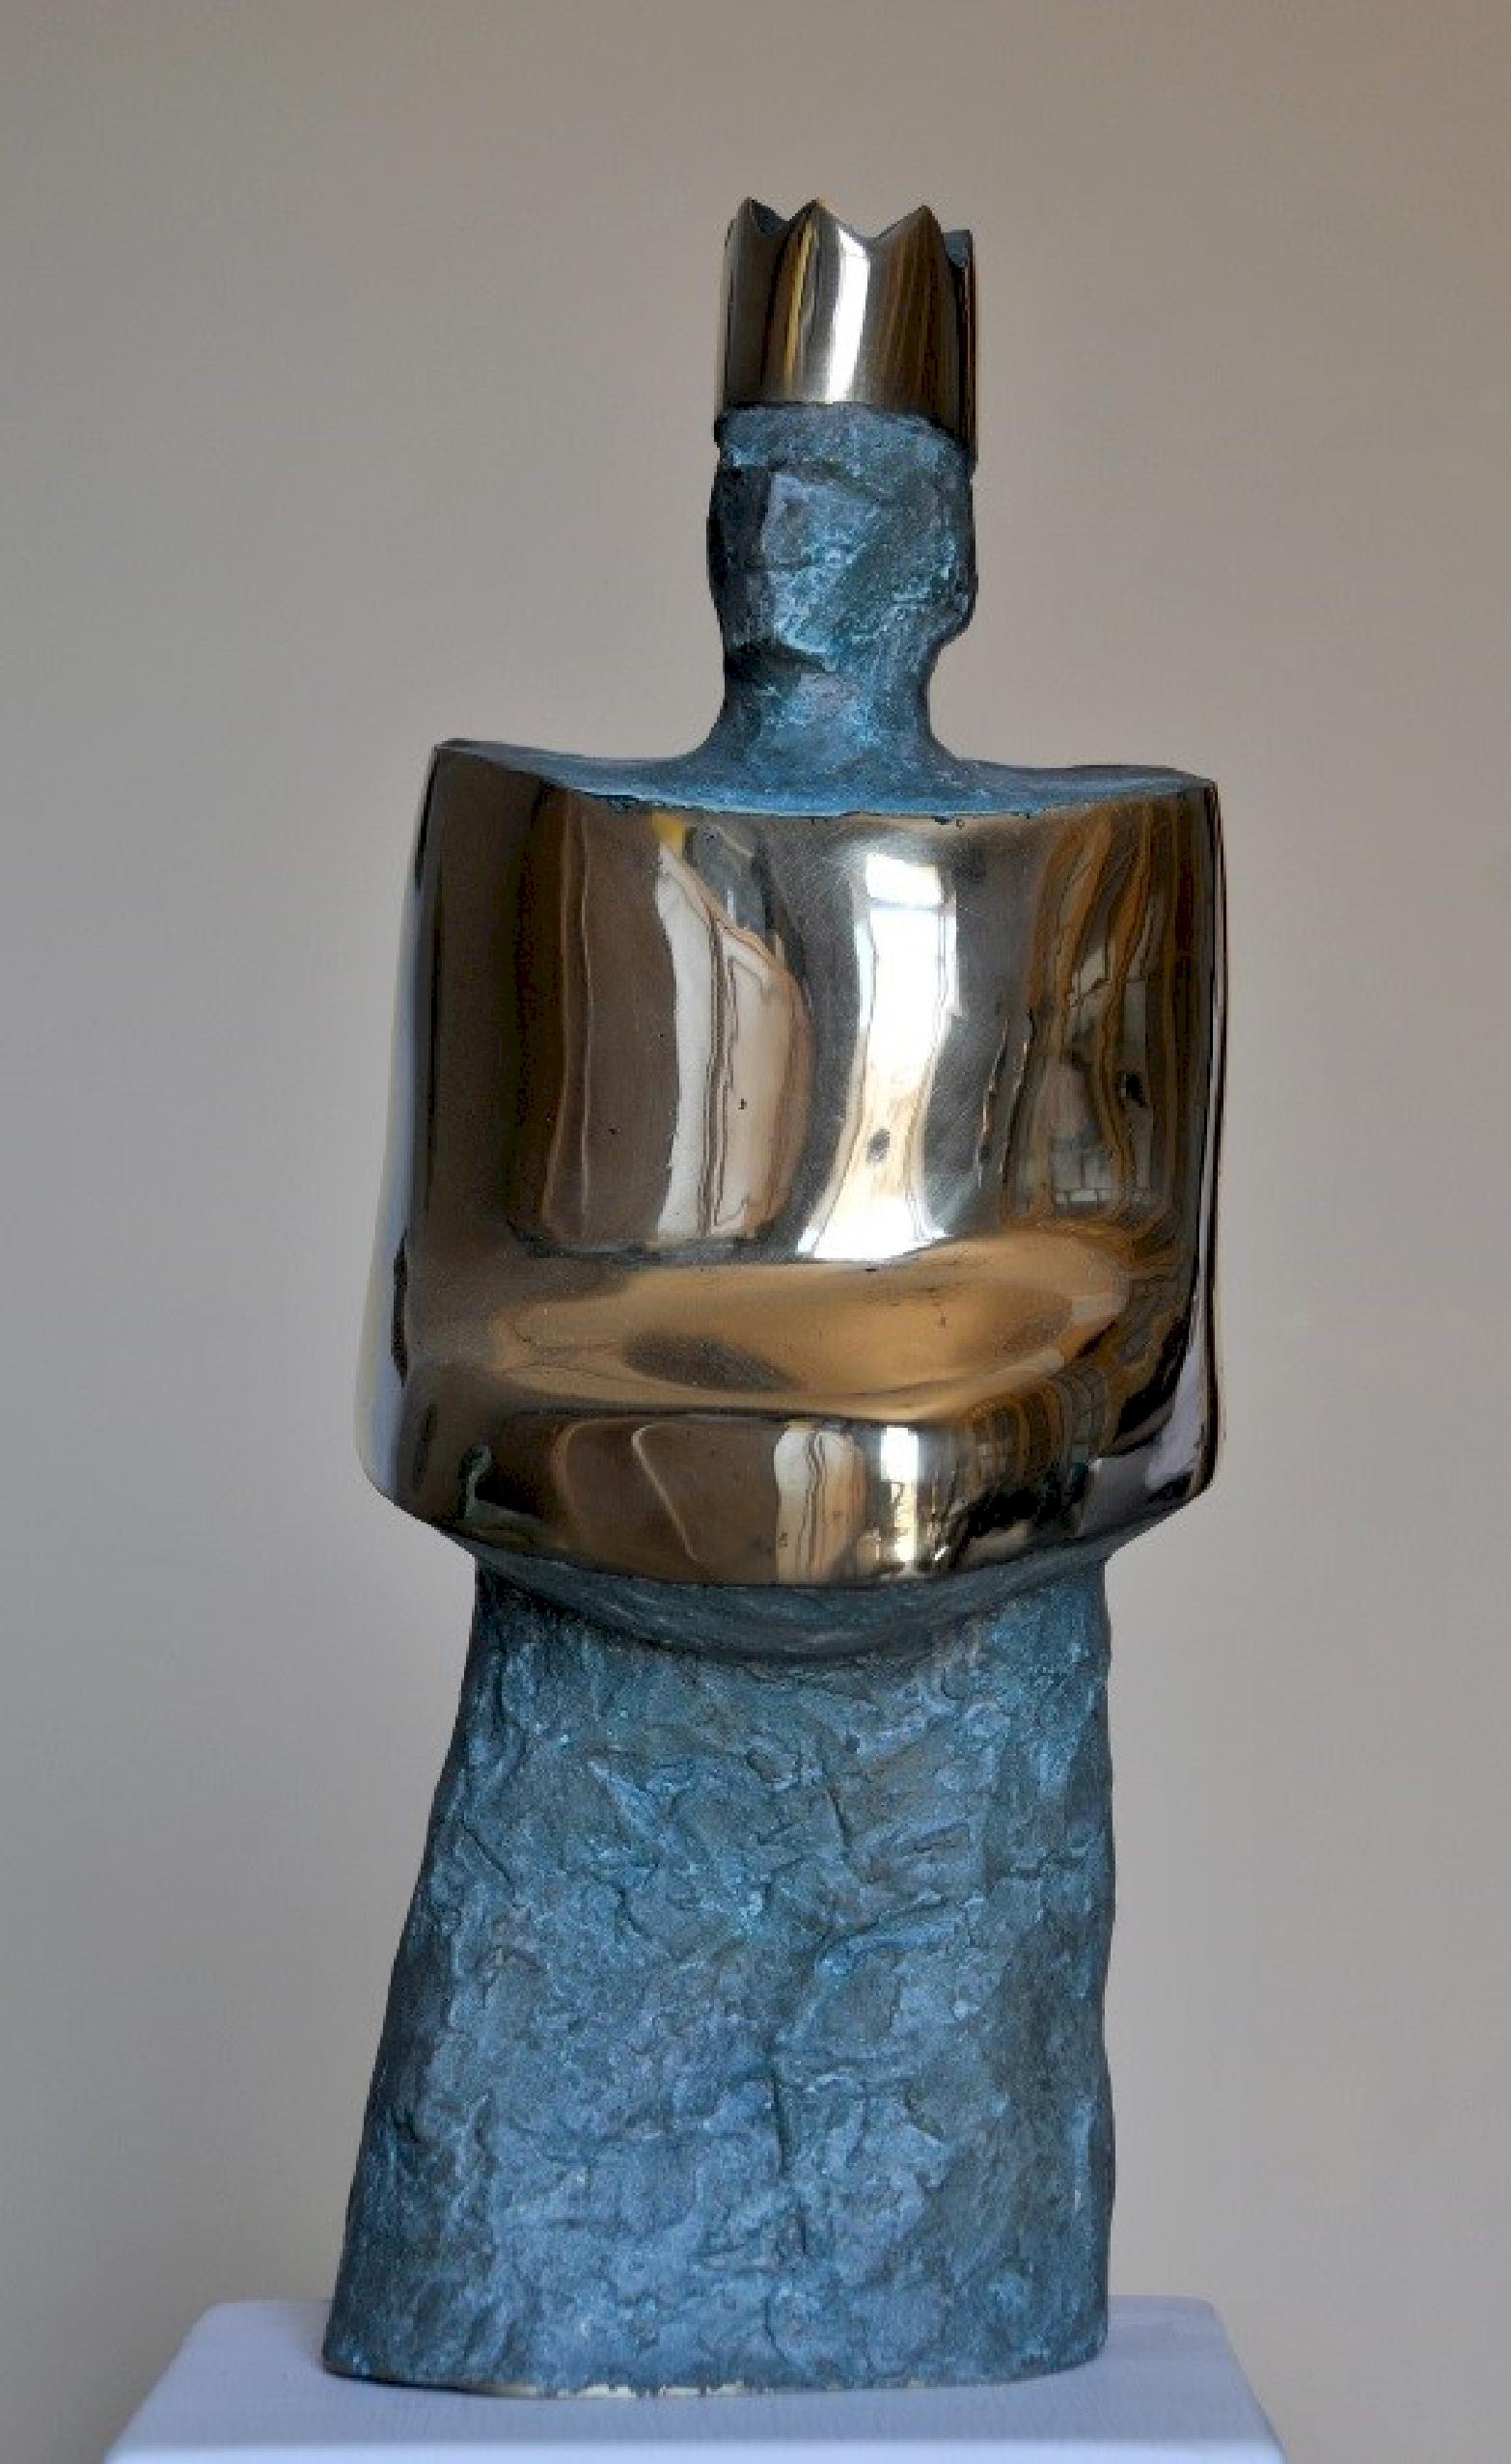 "Rex" Bronze Sculpture 16" x 7" x 6" inch by Sarkis Tossonian

Sarkis Tossoonian was born in Alexandria in 1953. He graduated from the Faculty of Fine Arts/Sculpture in 1979. He started exhibiting in individual and group exhibitions in Alexandria